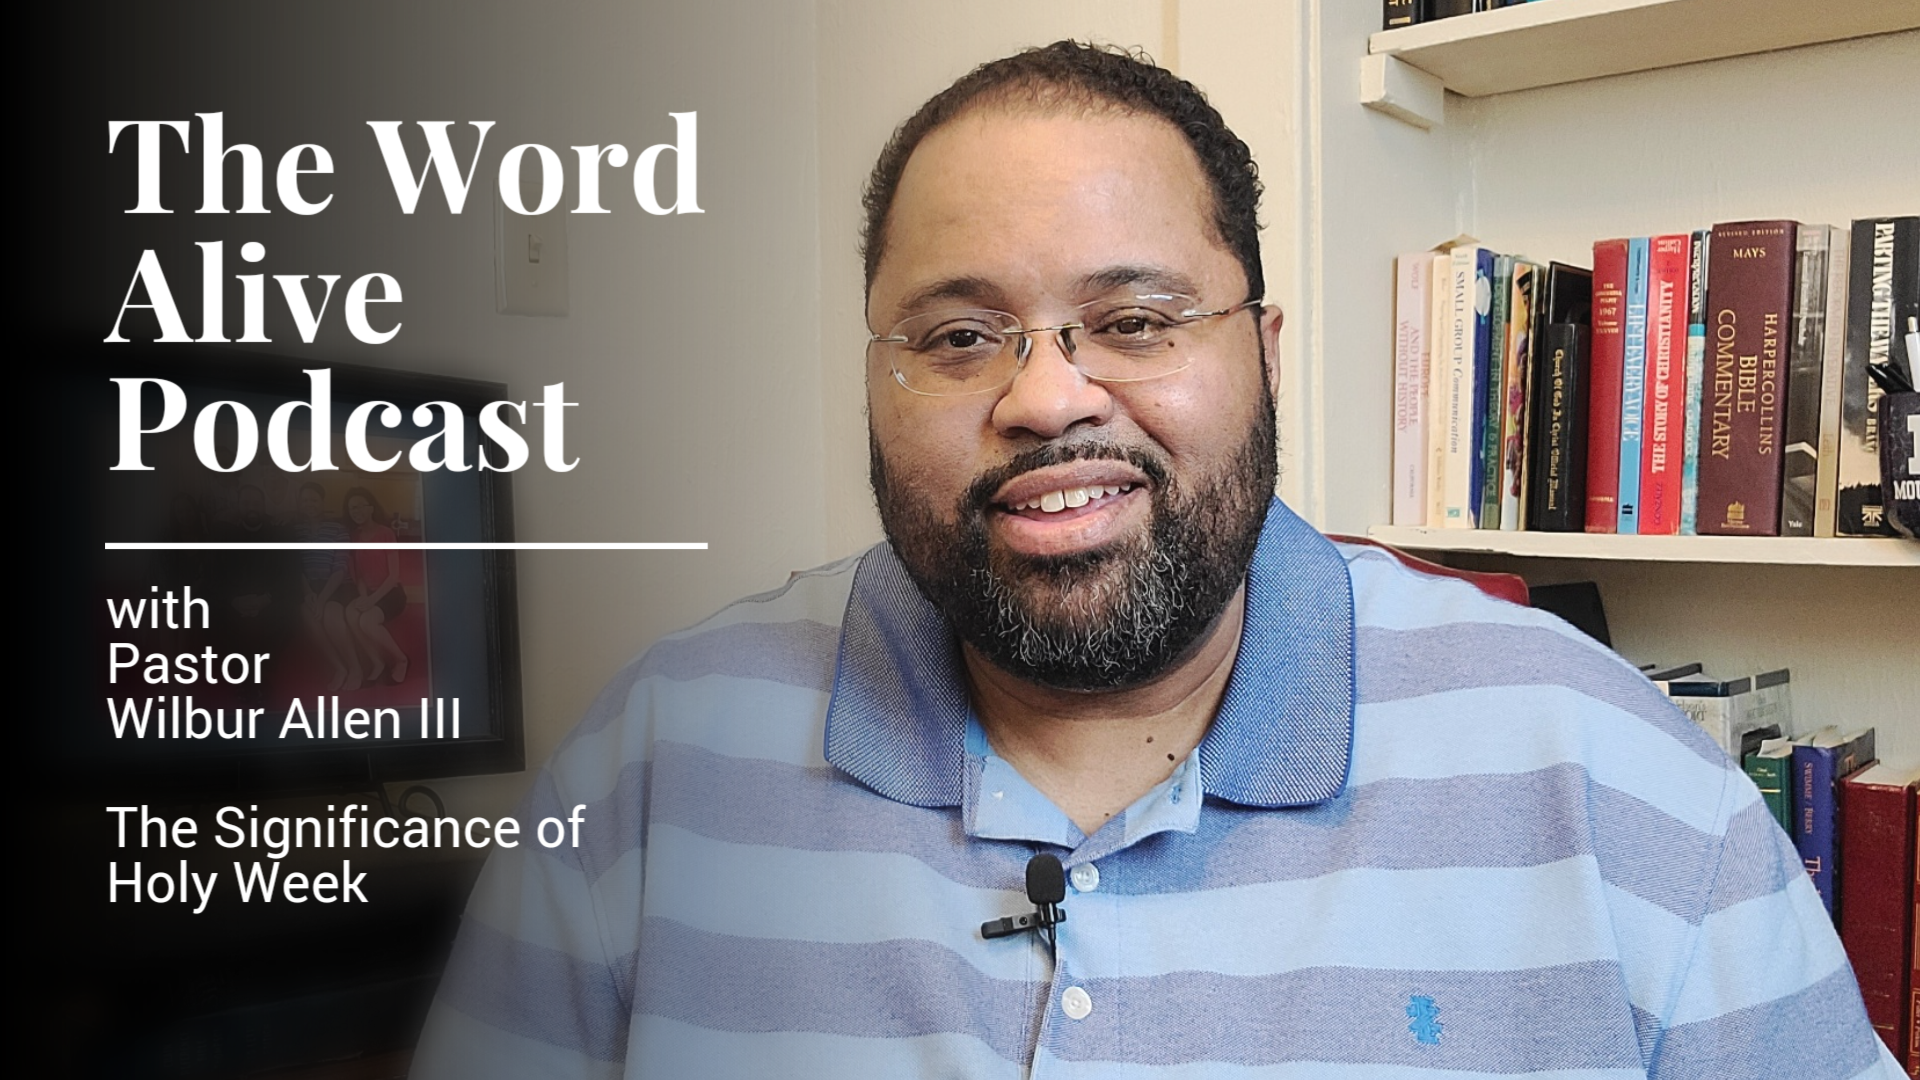 Word Alive Podcast - The Significance of Holy Week